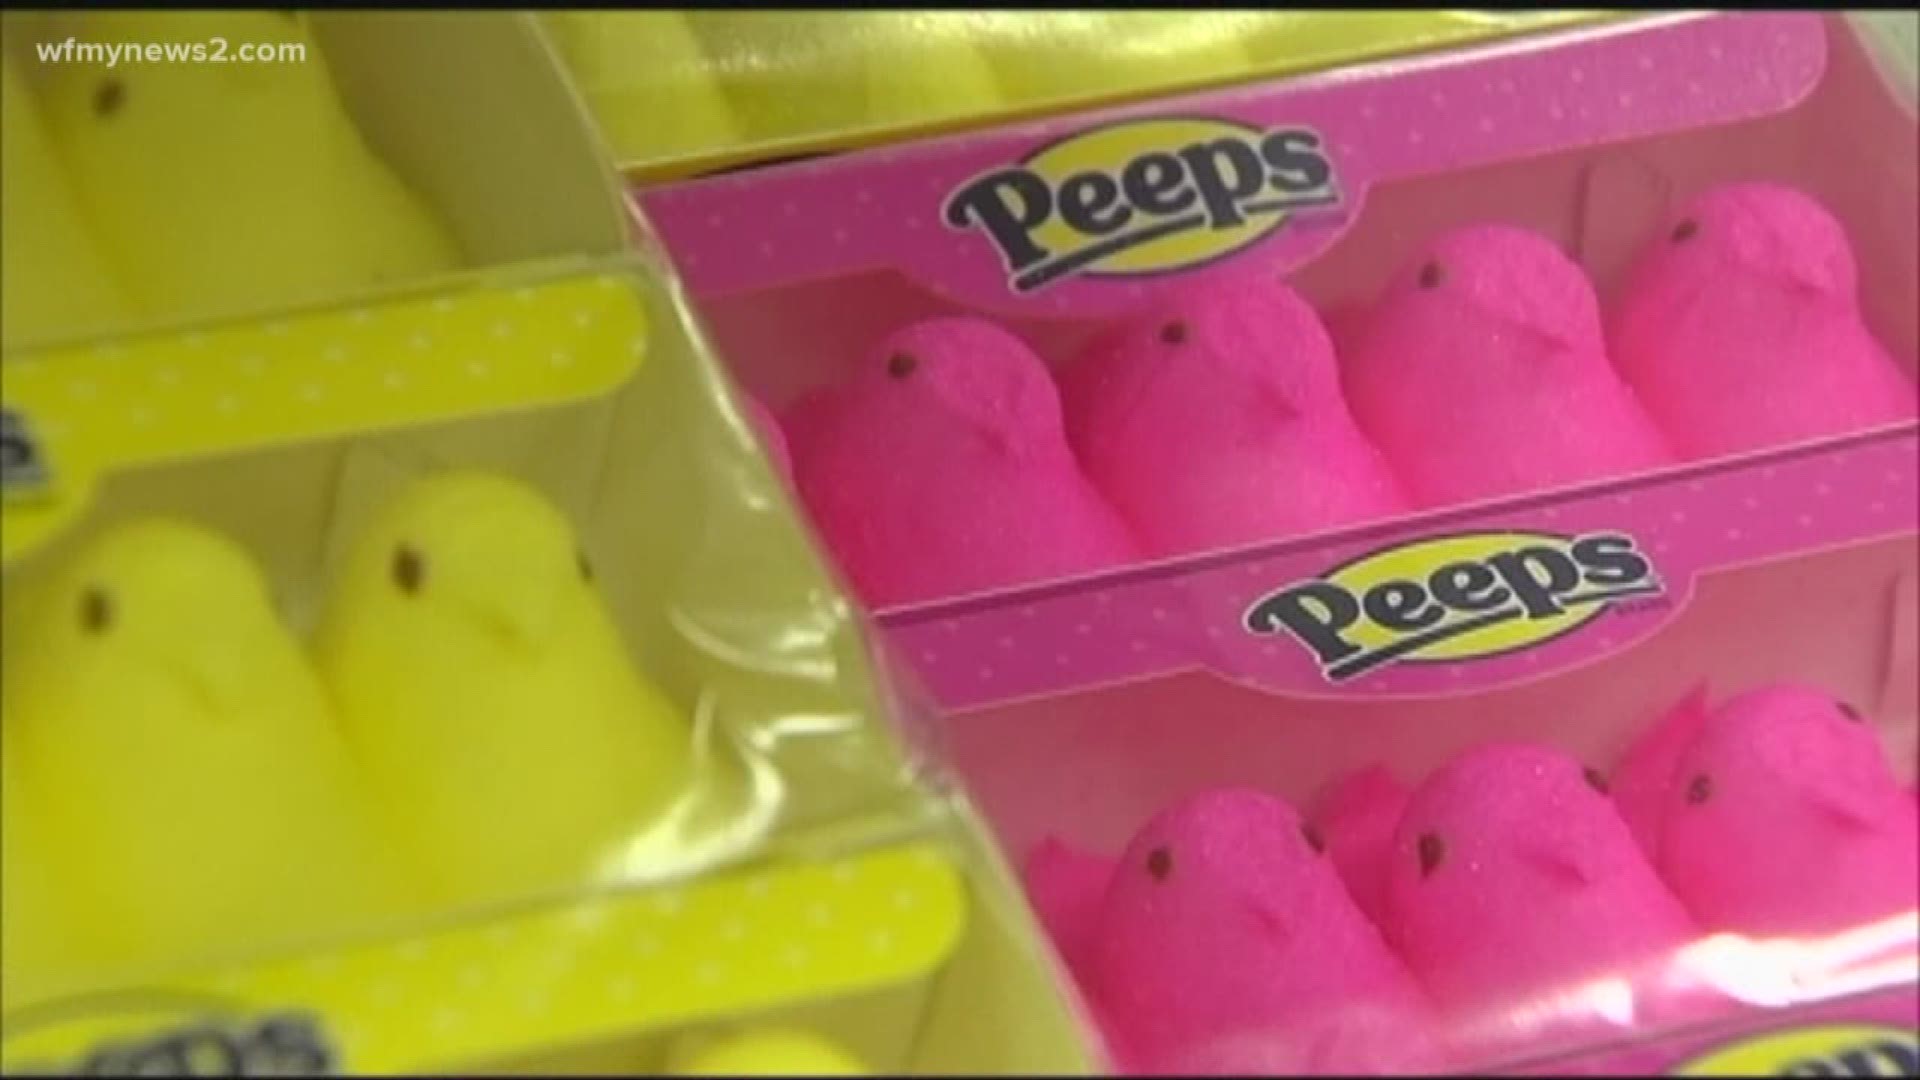 It’s not just the Peeps. You can find the dye in several brightly colored processed foods and sweets.